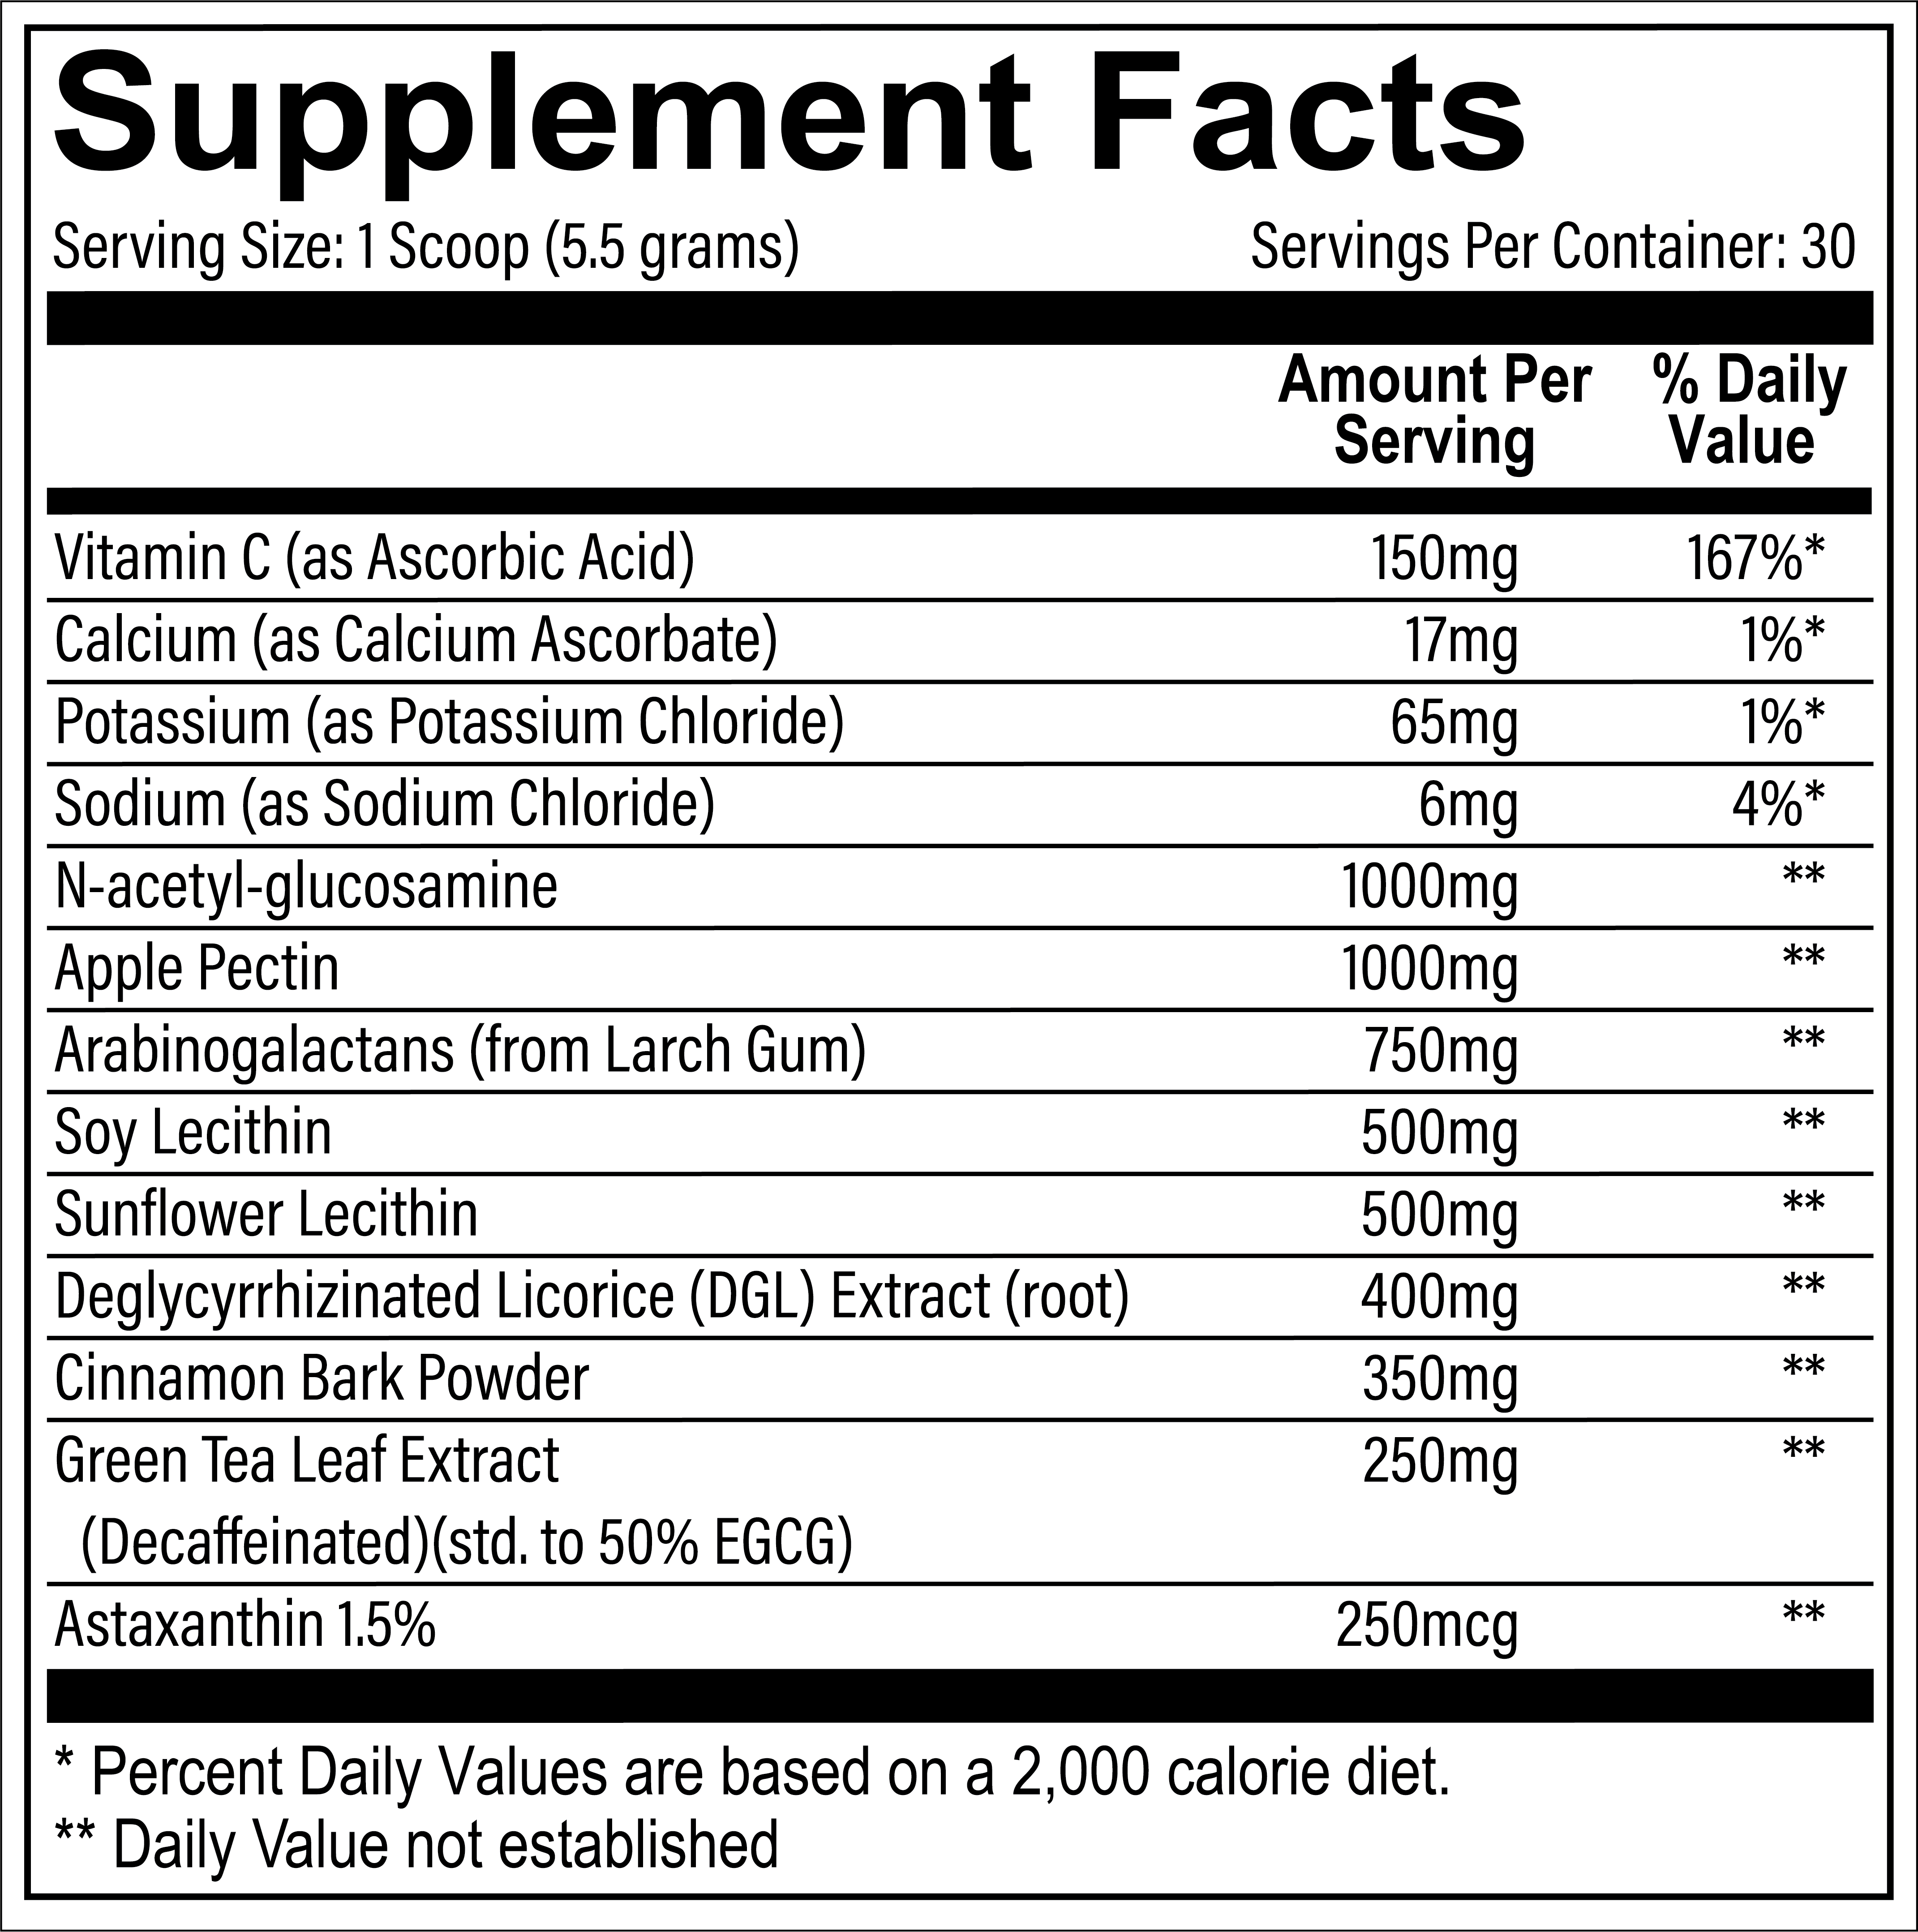 GI_Supplement_Facts